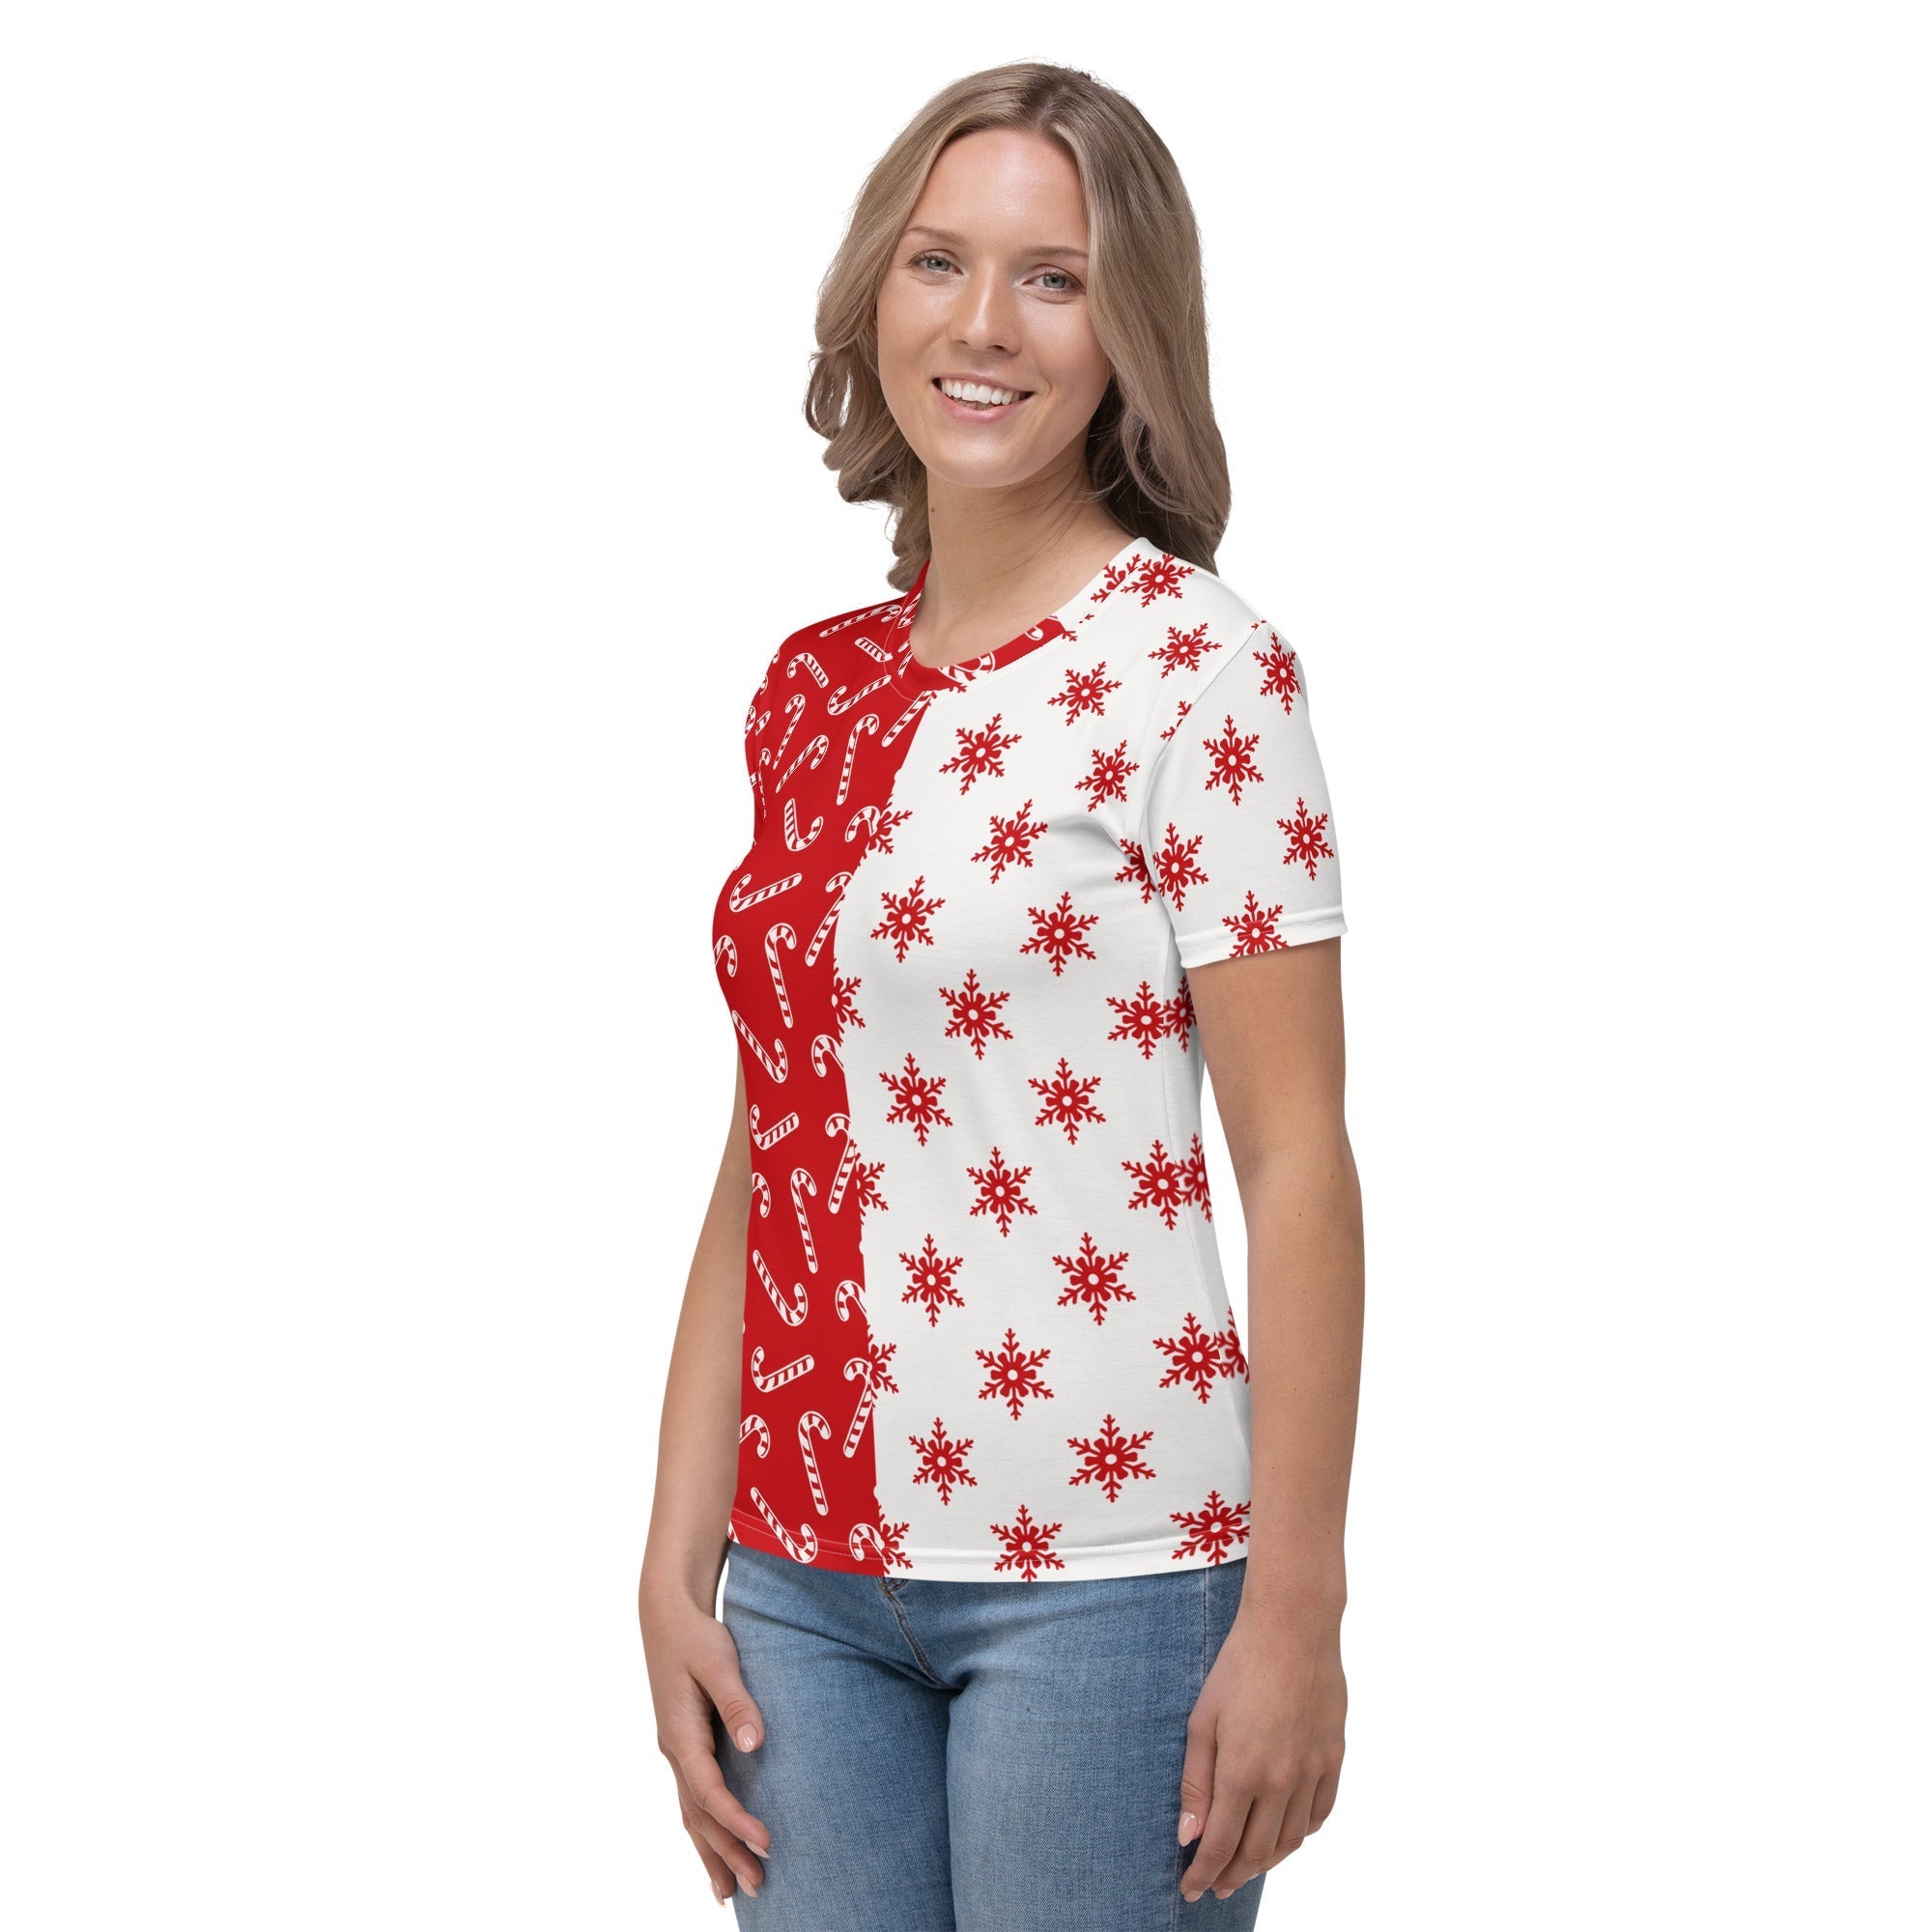 Two Patterned Christmas T-shirt